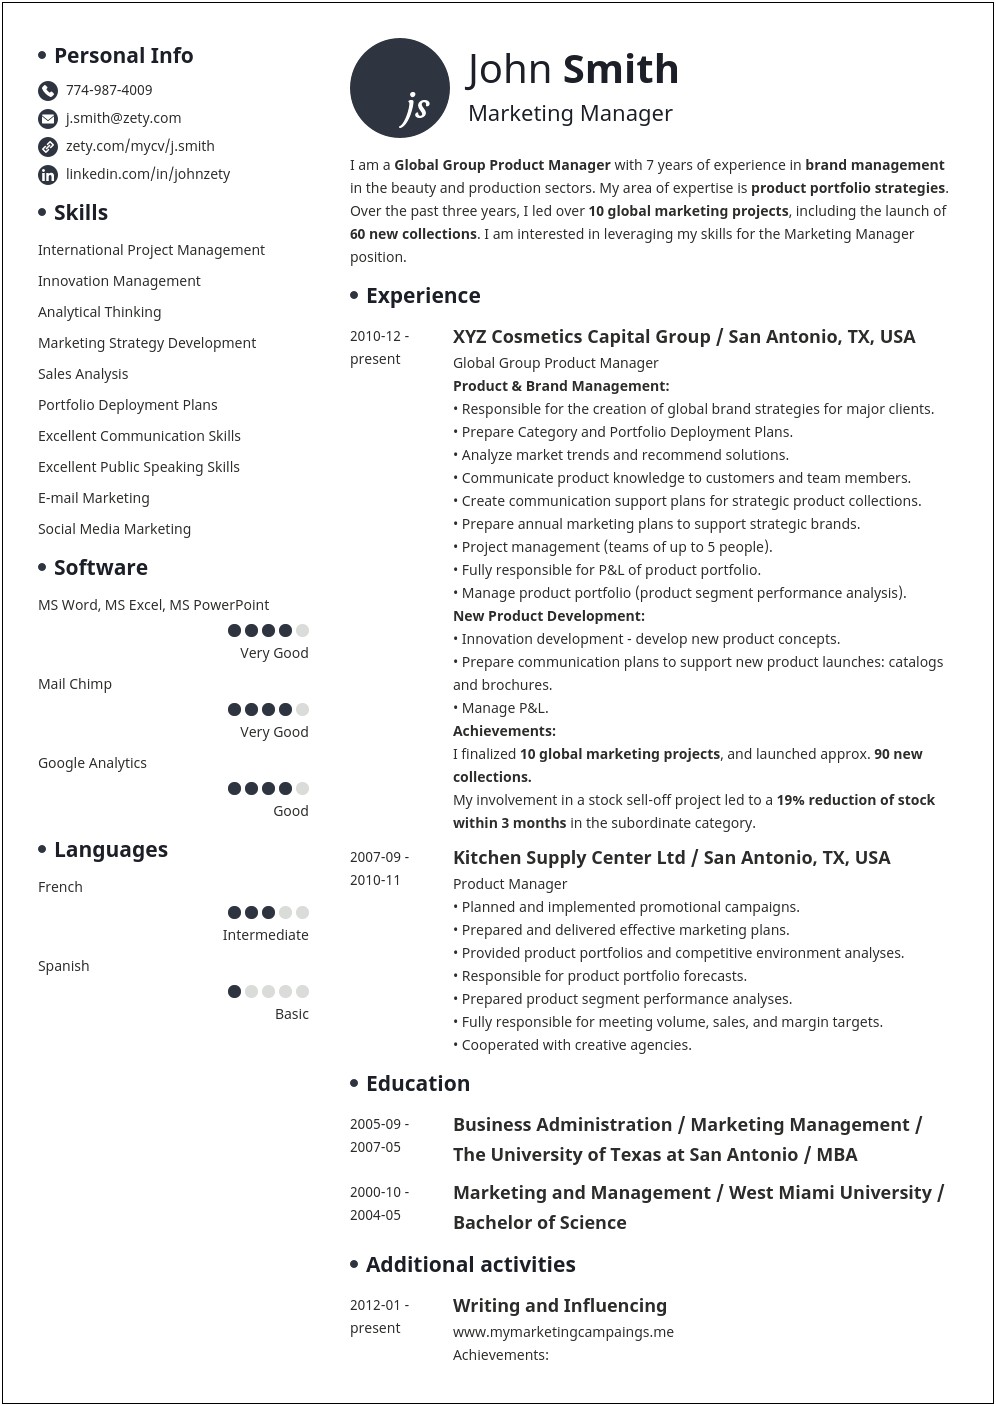 Show Examples Of Education On Resume